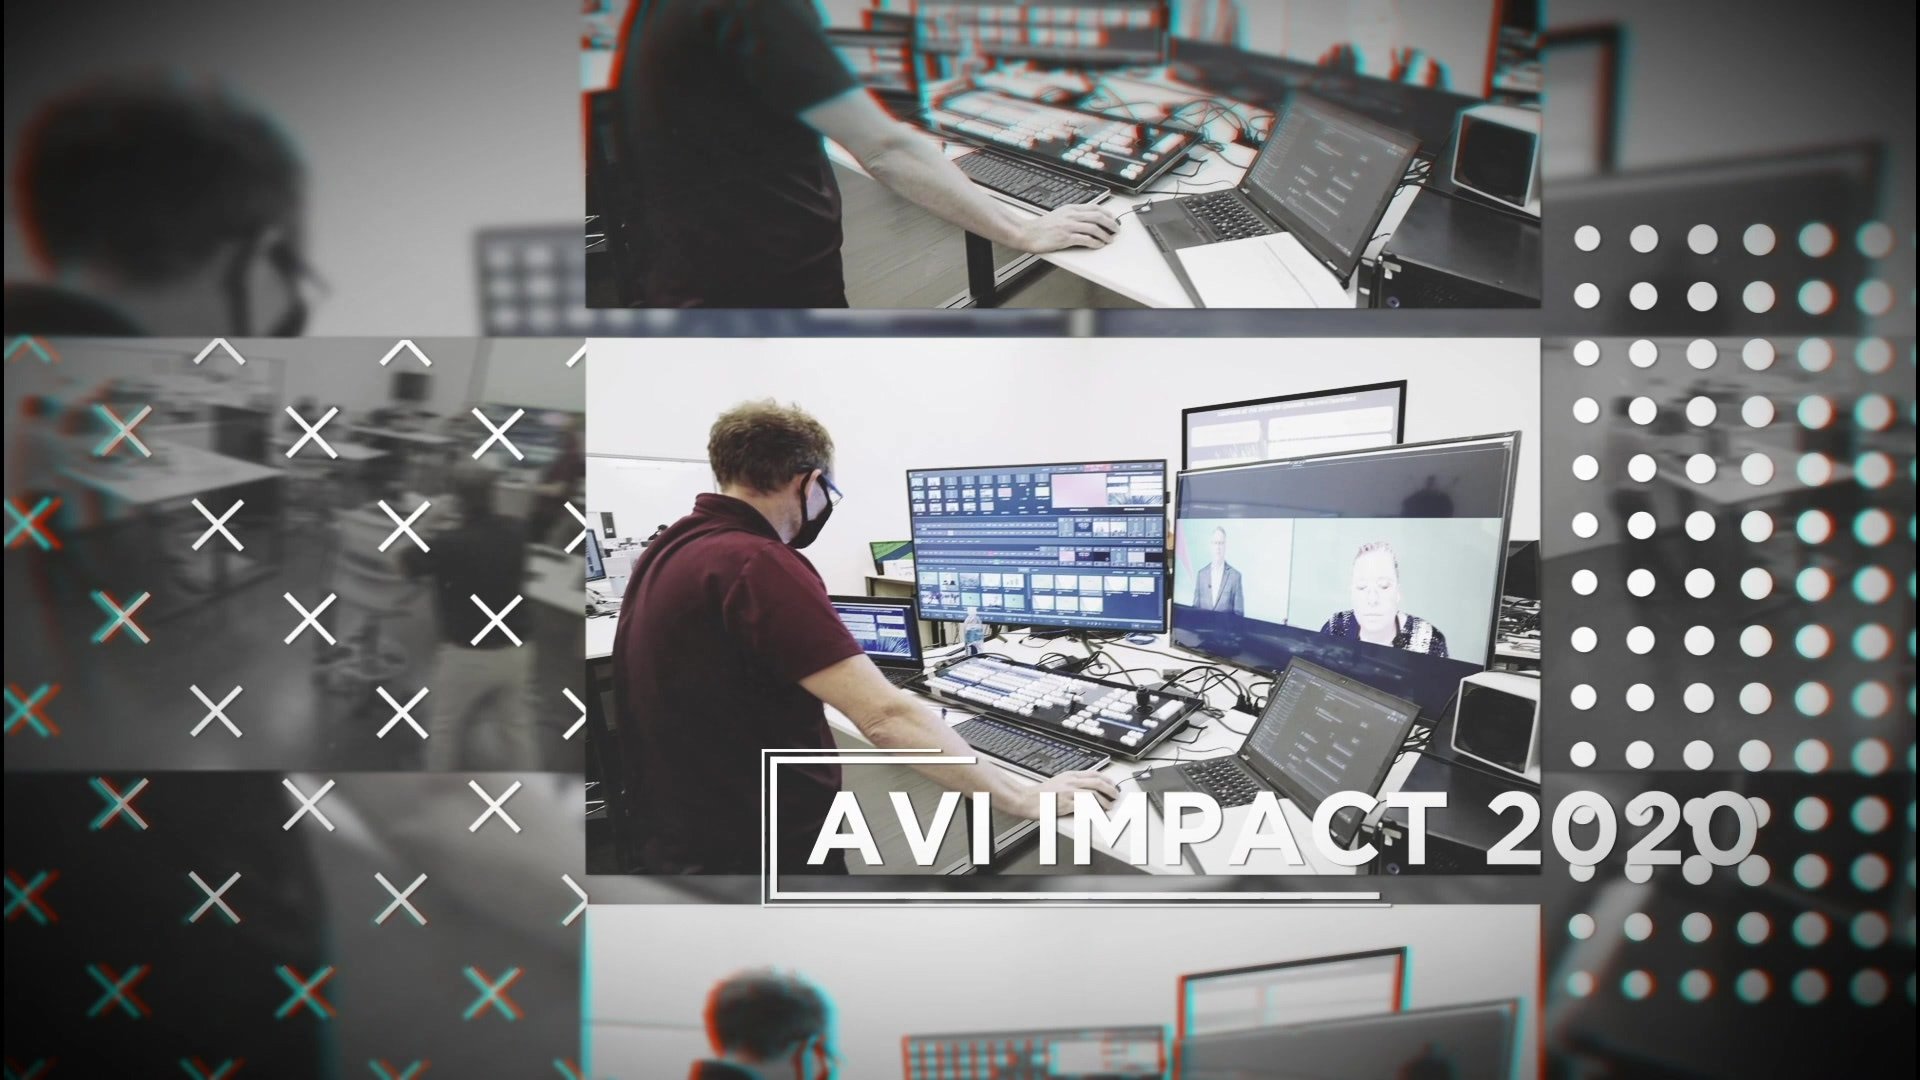 In September 2020, AVI Systems hosted a premium, three-hour virtual event called AVI Impact that surpassed the stale webinar experience.